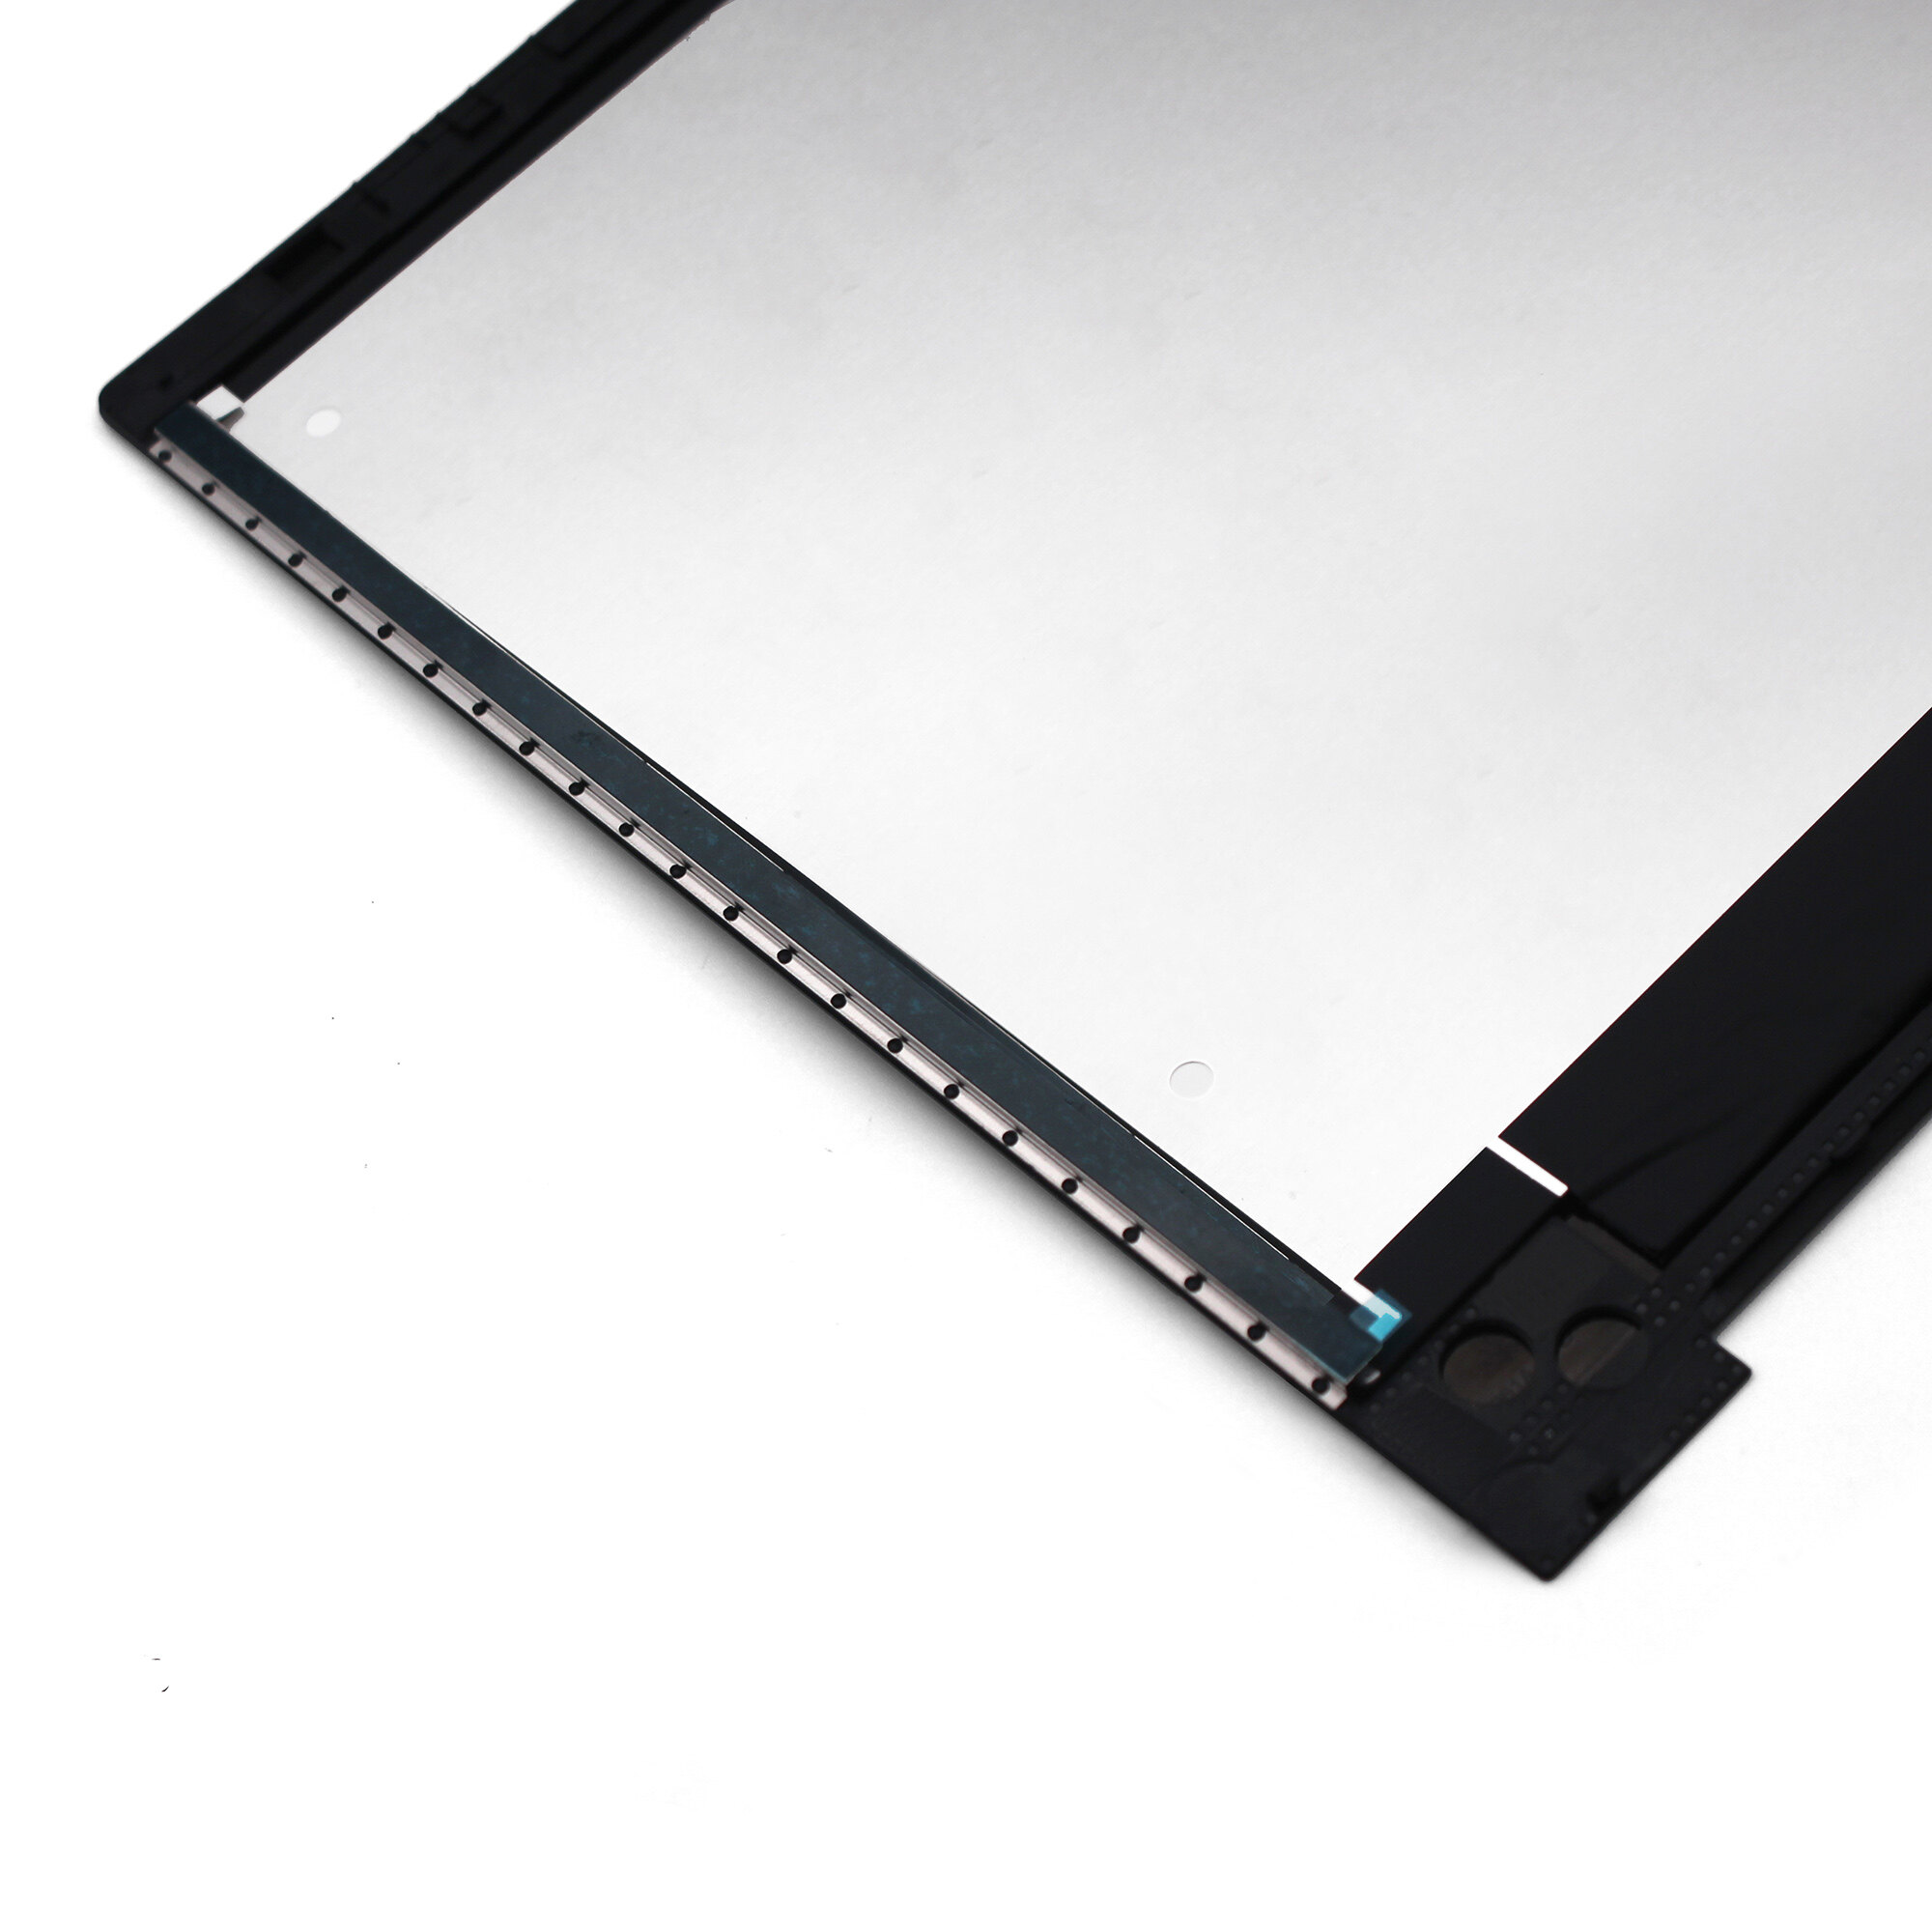 Kreplacement 13.3" Laptop LED LCD Touch Screen Assembly With Bezel For HP Evny x360 13-ag series 1920x1080